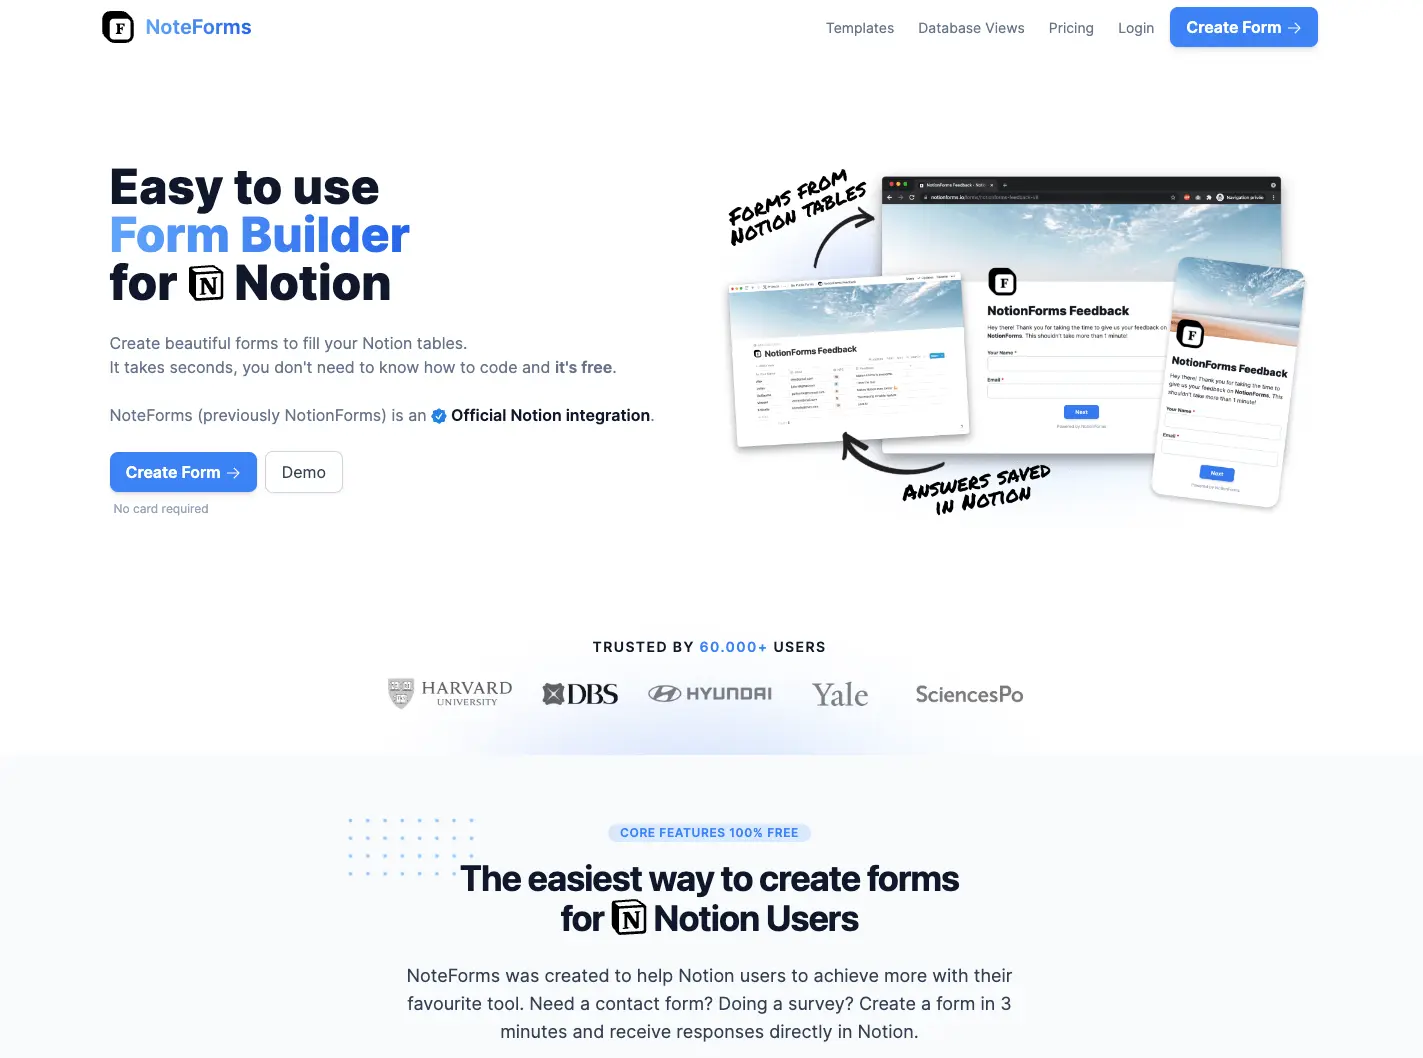 NoteForms landing page